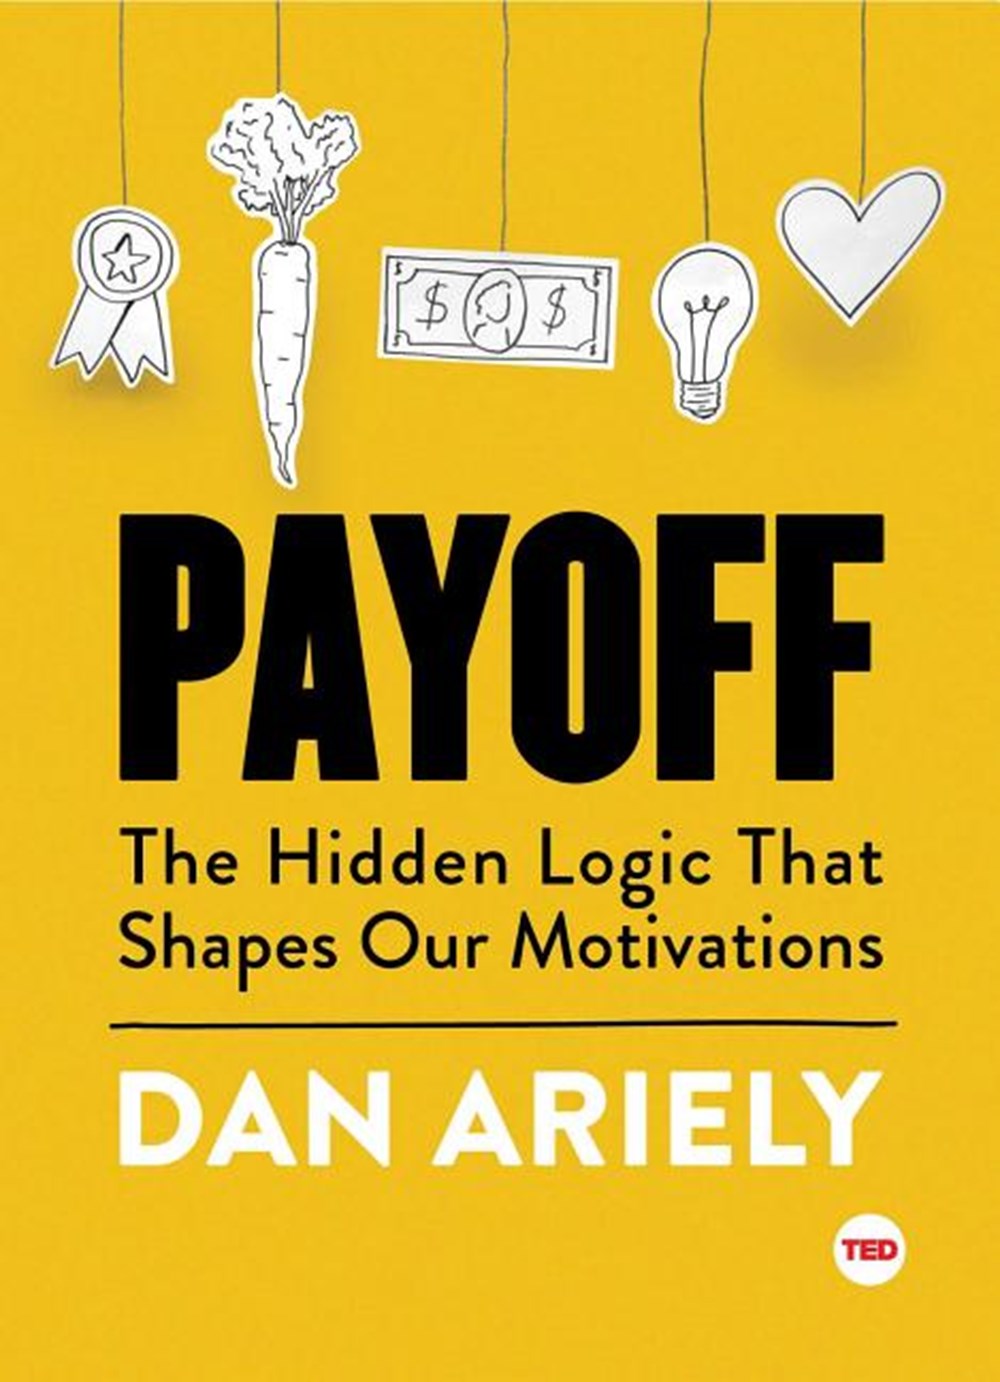 Payoff The Hidden Logic That Shapes Our Motivations